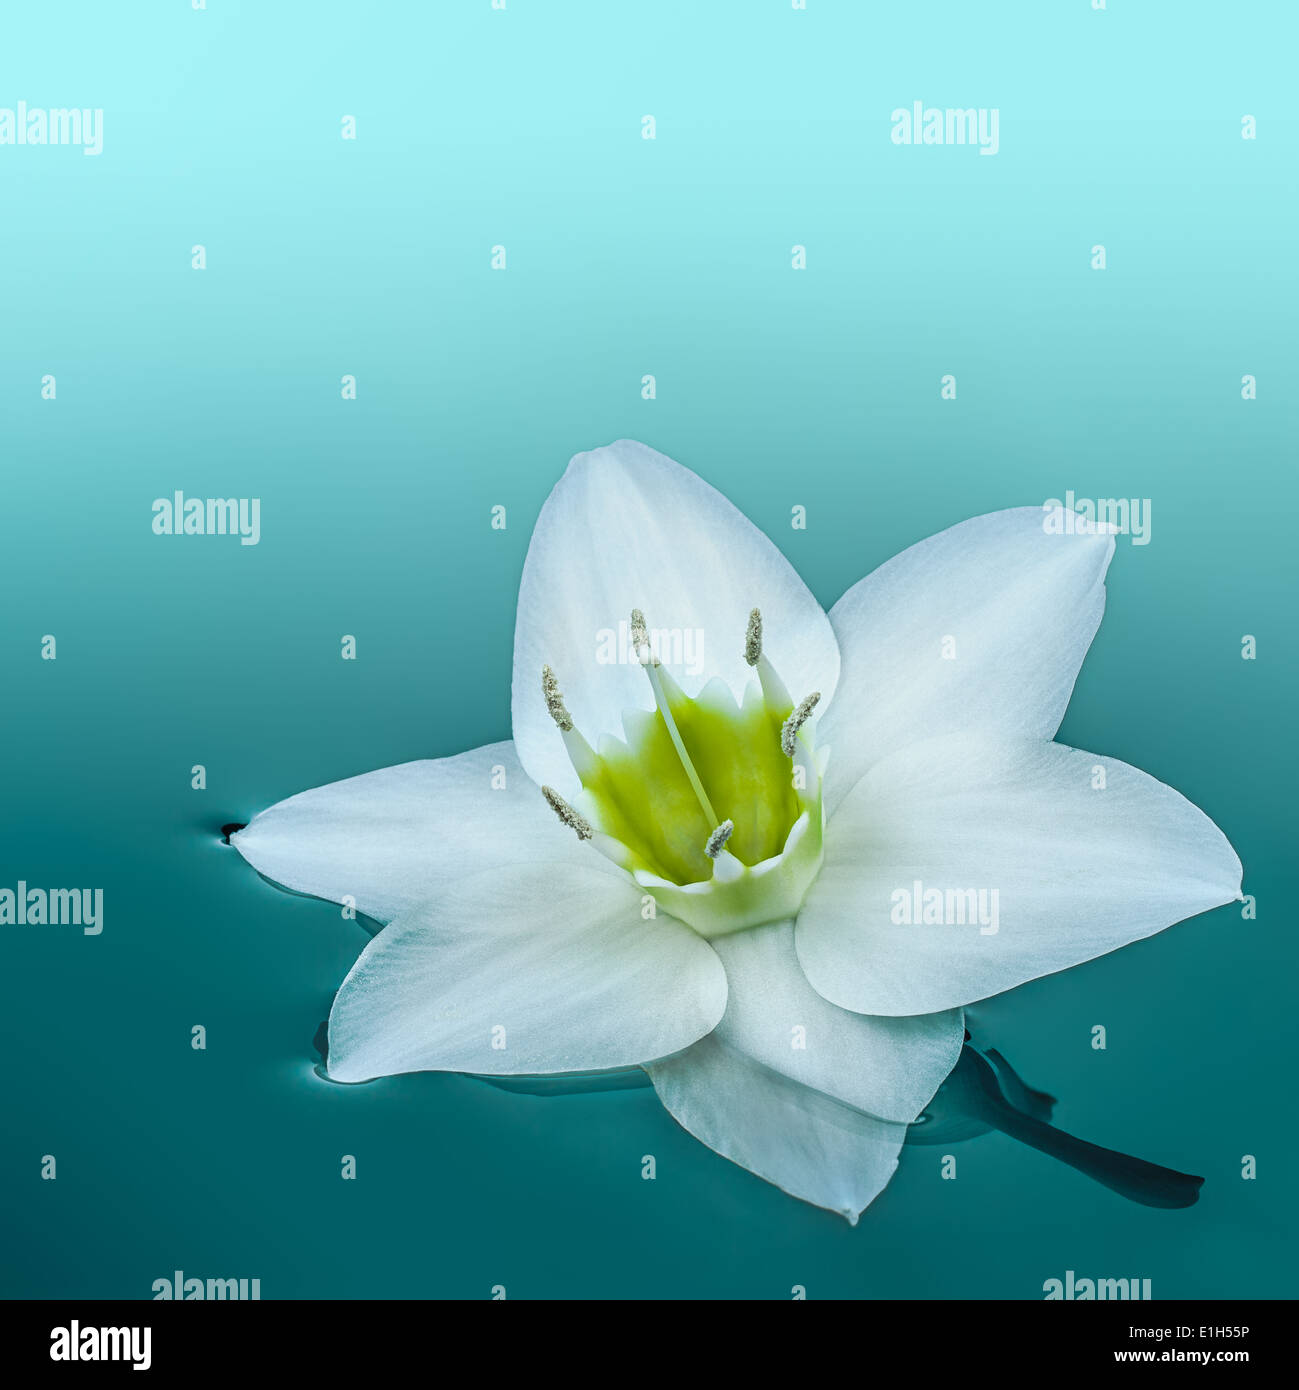 White Amazon lily flower afloat on turquoise water Stock Photo